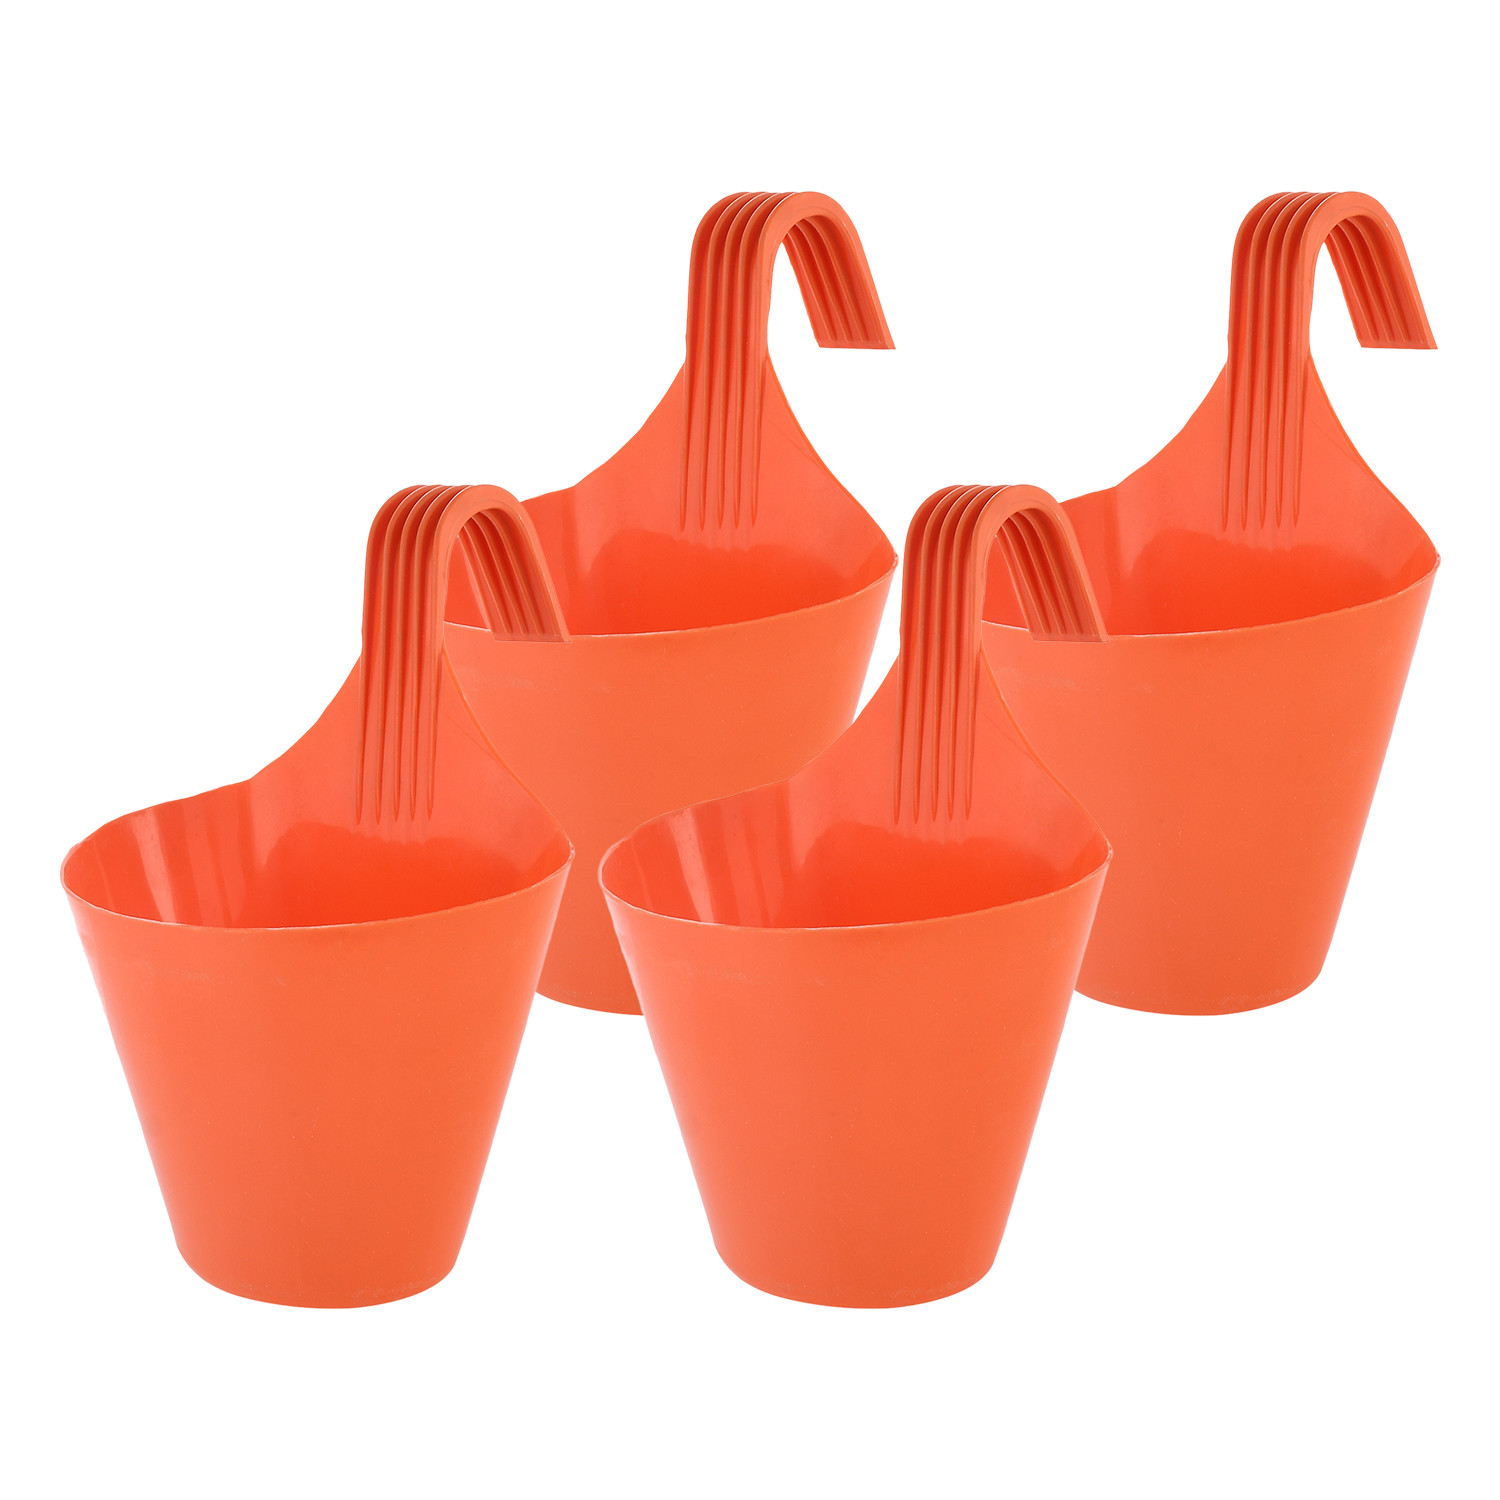 Kuber Industries Hanging Flower Pot|Single Hook Plant Container|Durable Plastic Glossy Finish Pots for Home|Balcony|Garden|9 Inch|(Orange)